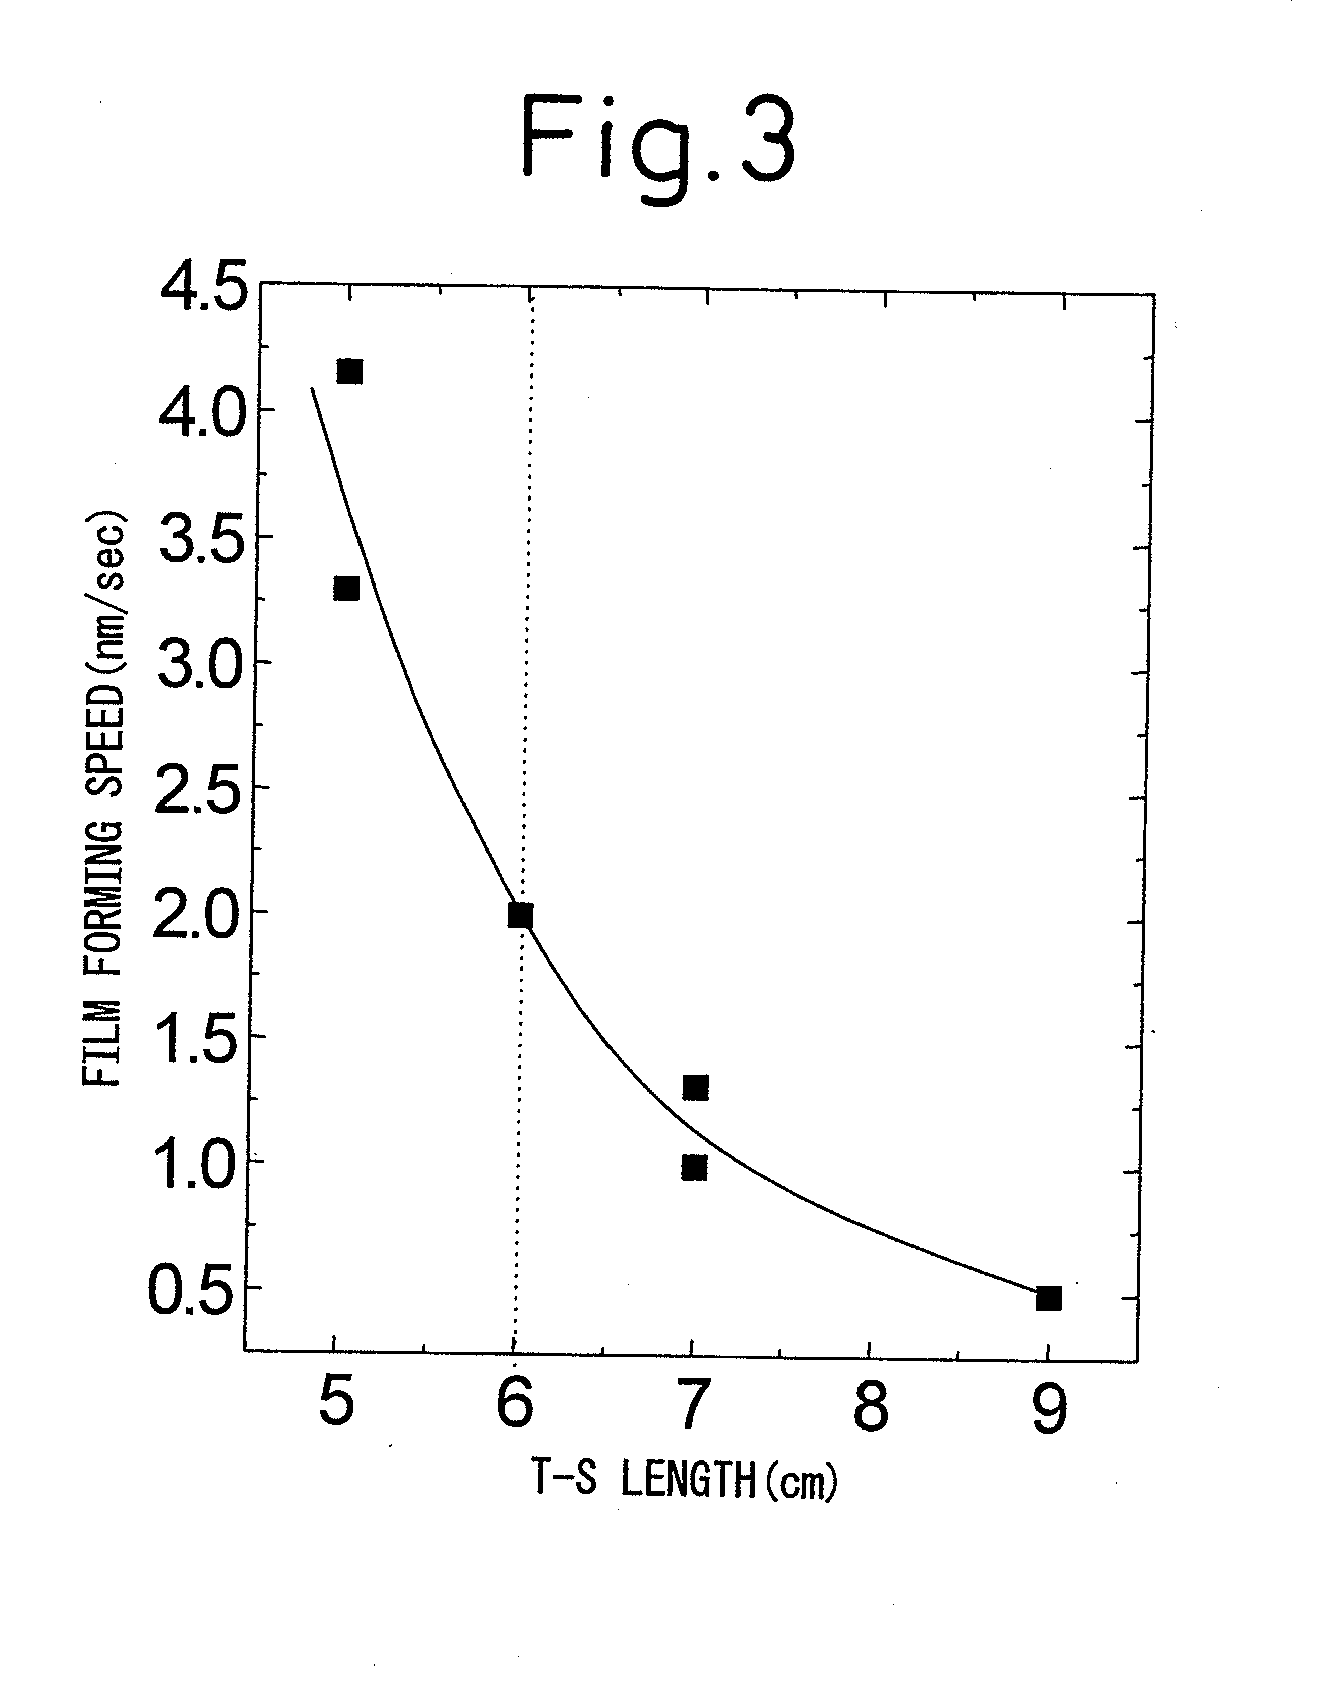 Re123-based oxide superconductor and method of production of same